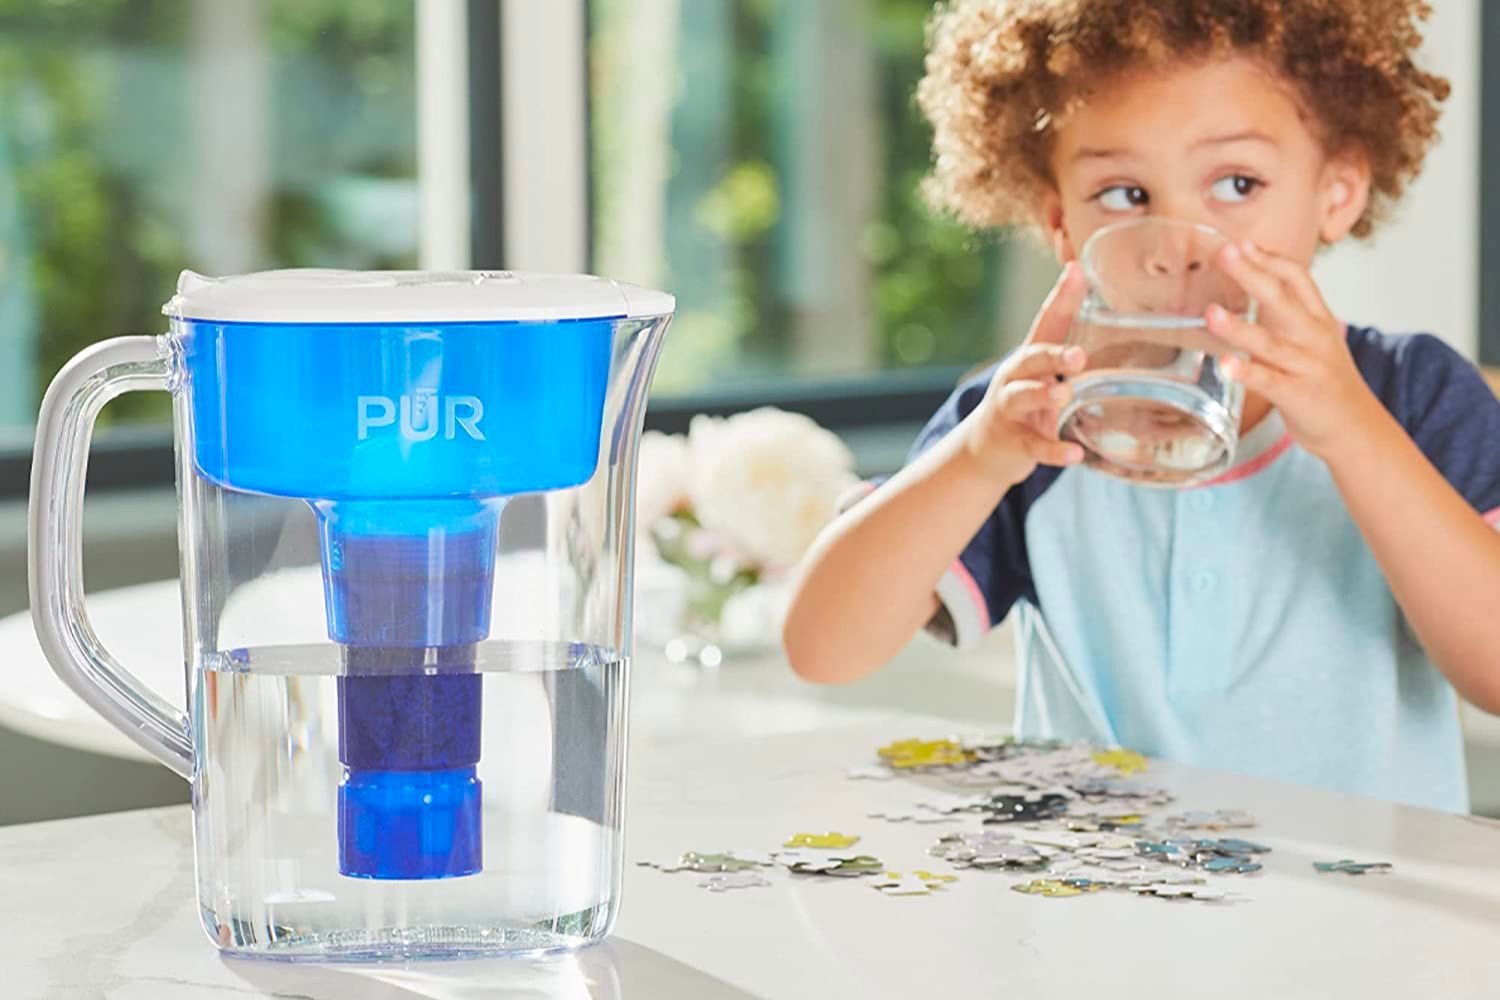 The best water filter pitcher option on a kitchen counter next to a young boy drinking a glass of water